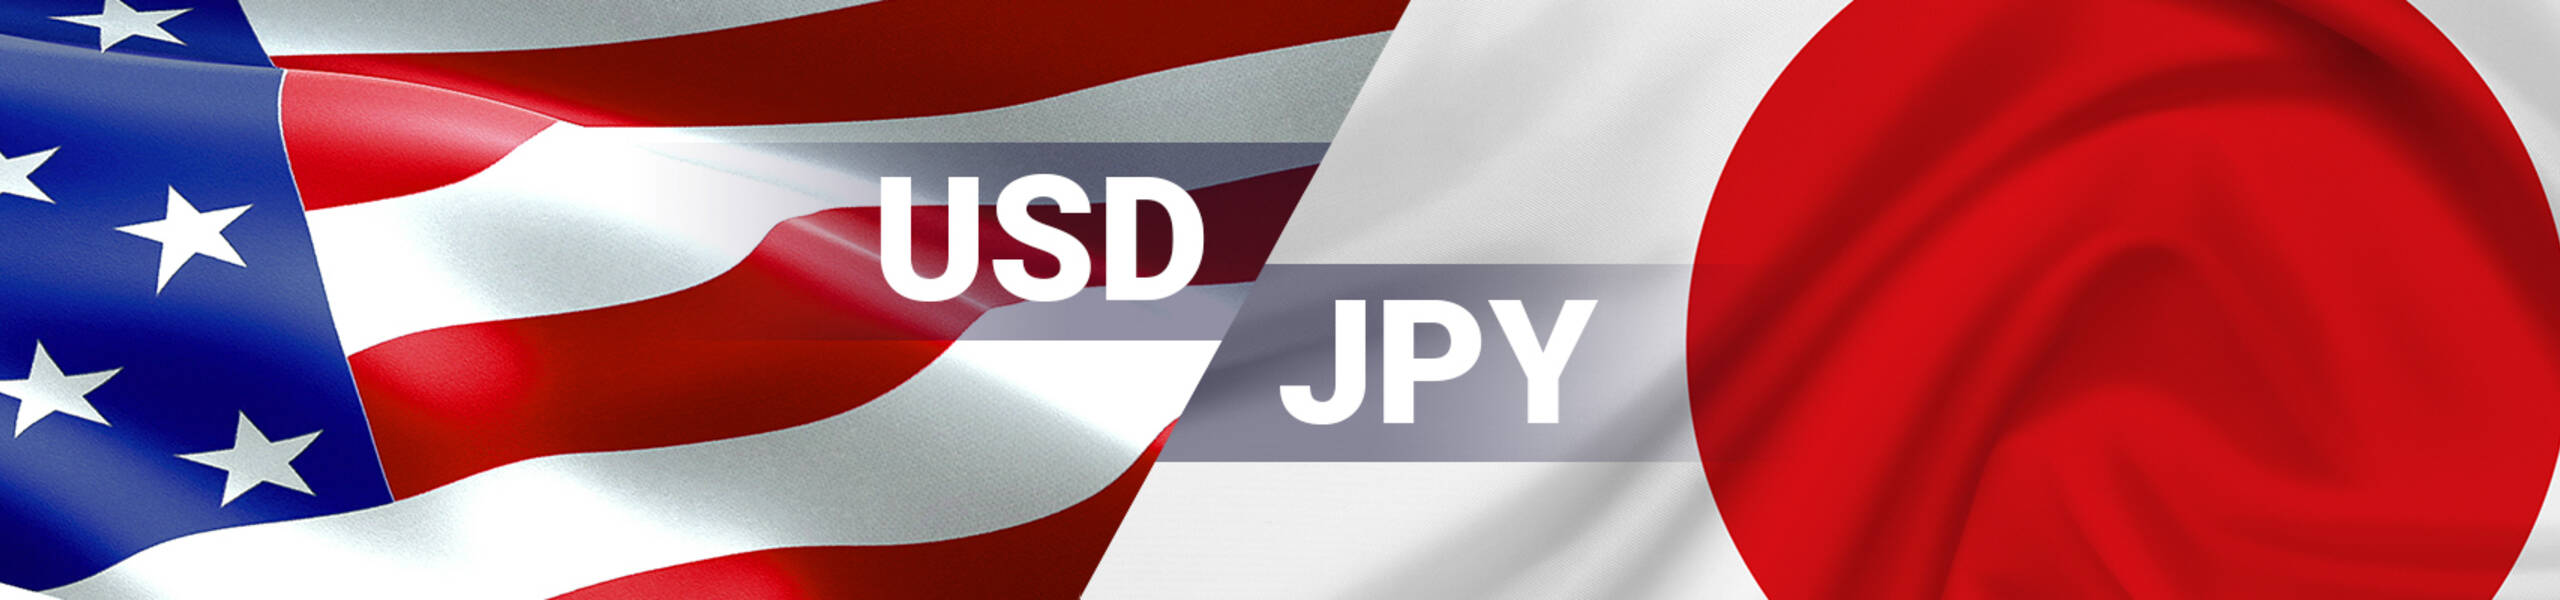 USD/JPY trying to push higher in the short-term